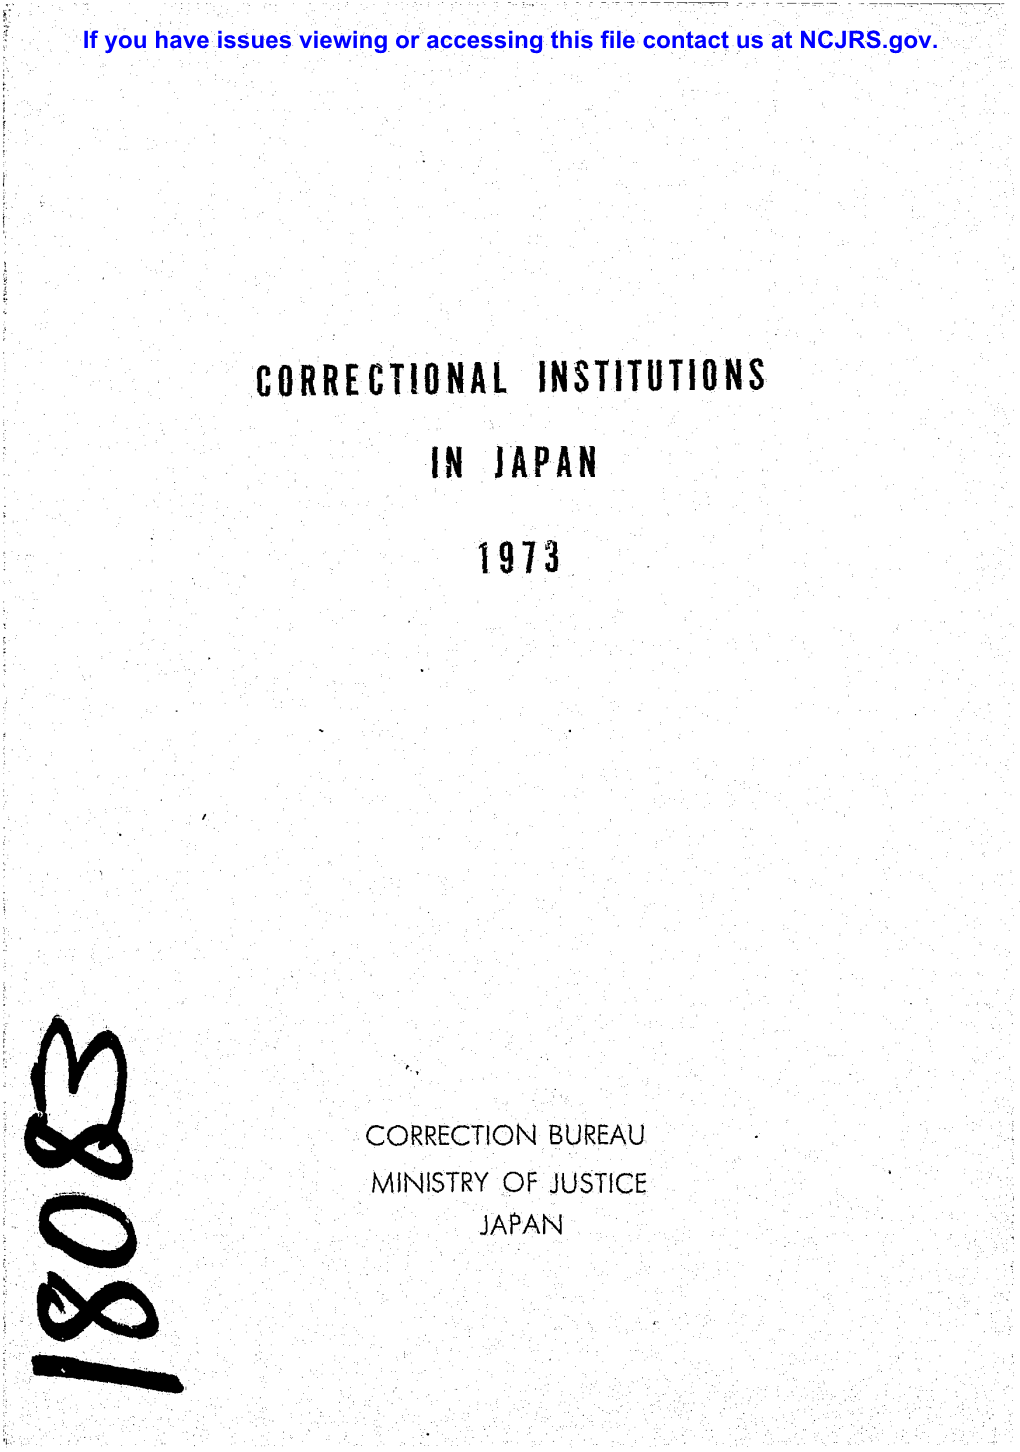 Corre Ctional Institutions in Japan